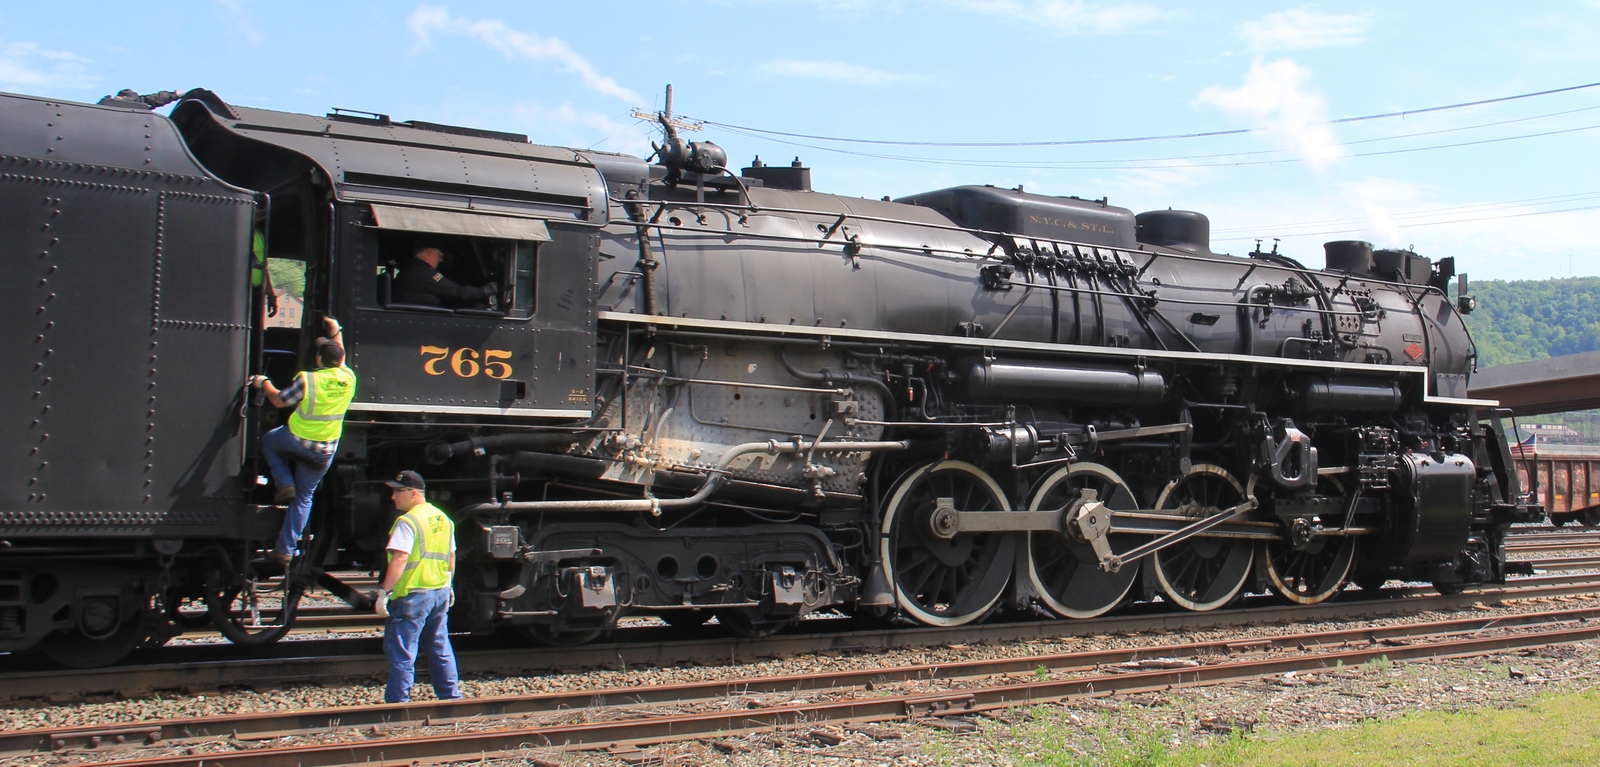 S-2 No. 765 in May 2013